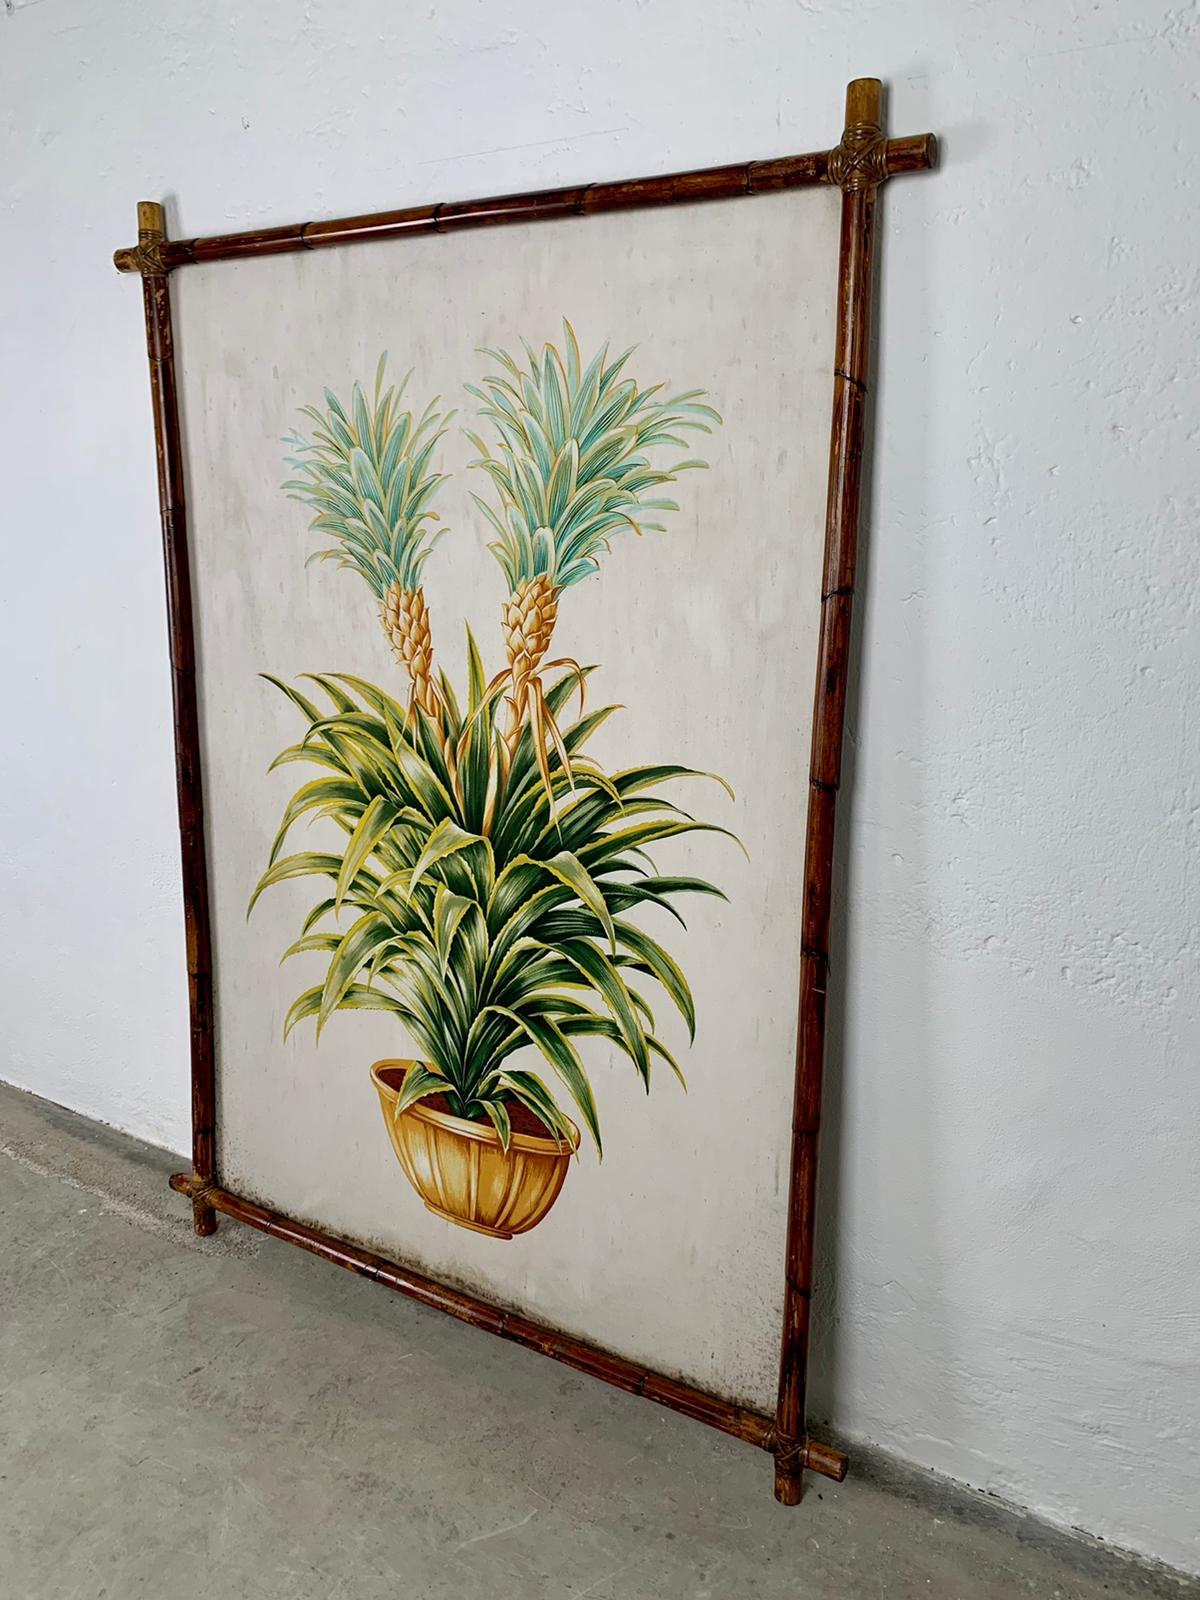 Decorative canvas panel with bamboo frame, 1960s
Decorative panel on canvas representing a palm tree with bamboo frame. 

Good condition, signs of time, stains on canvas

write to us for further information